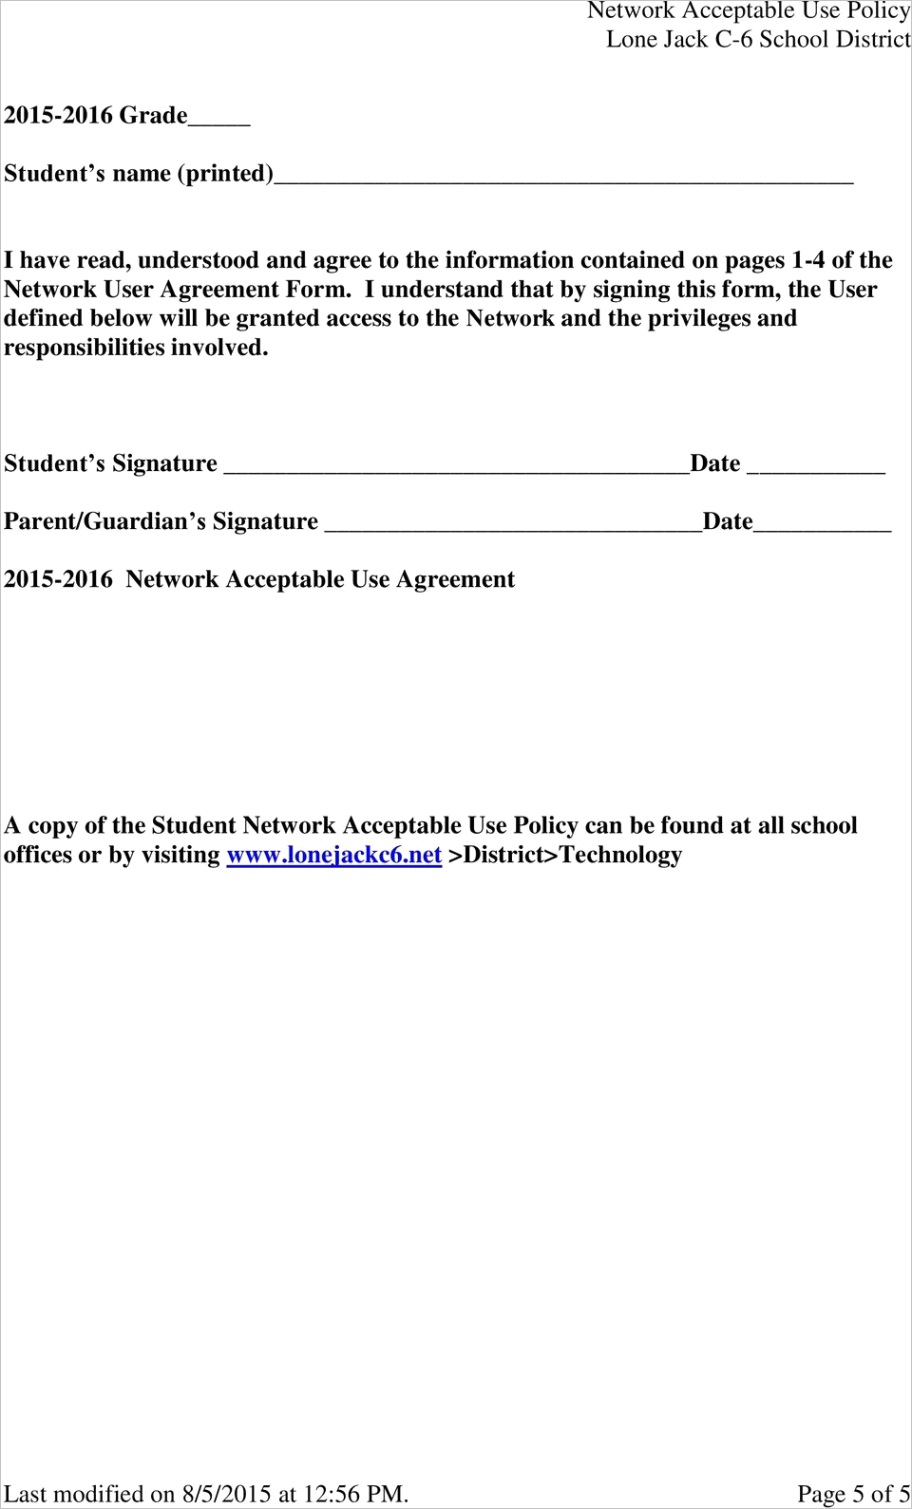 Student network acceptable use policy lone jack c 6 school district